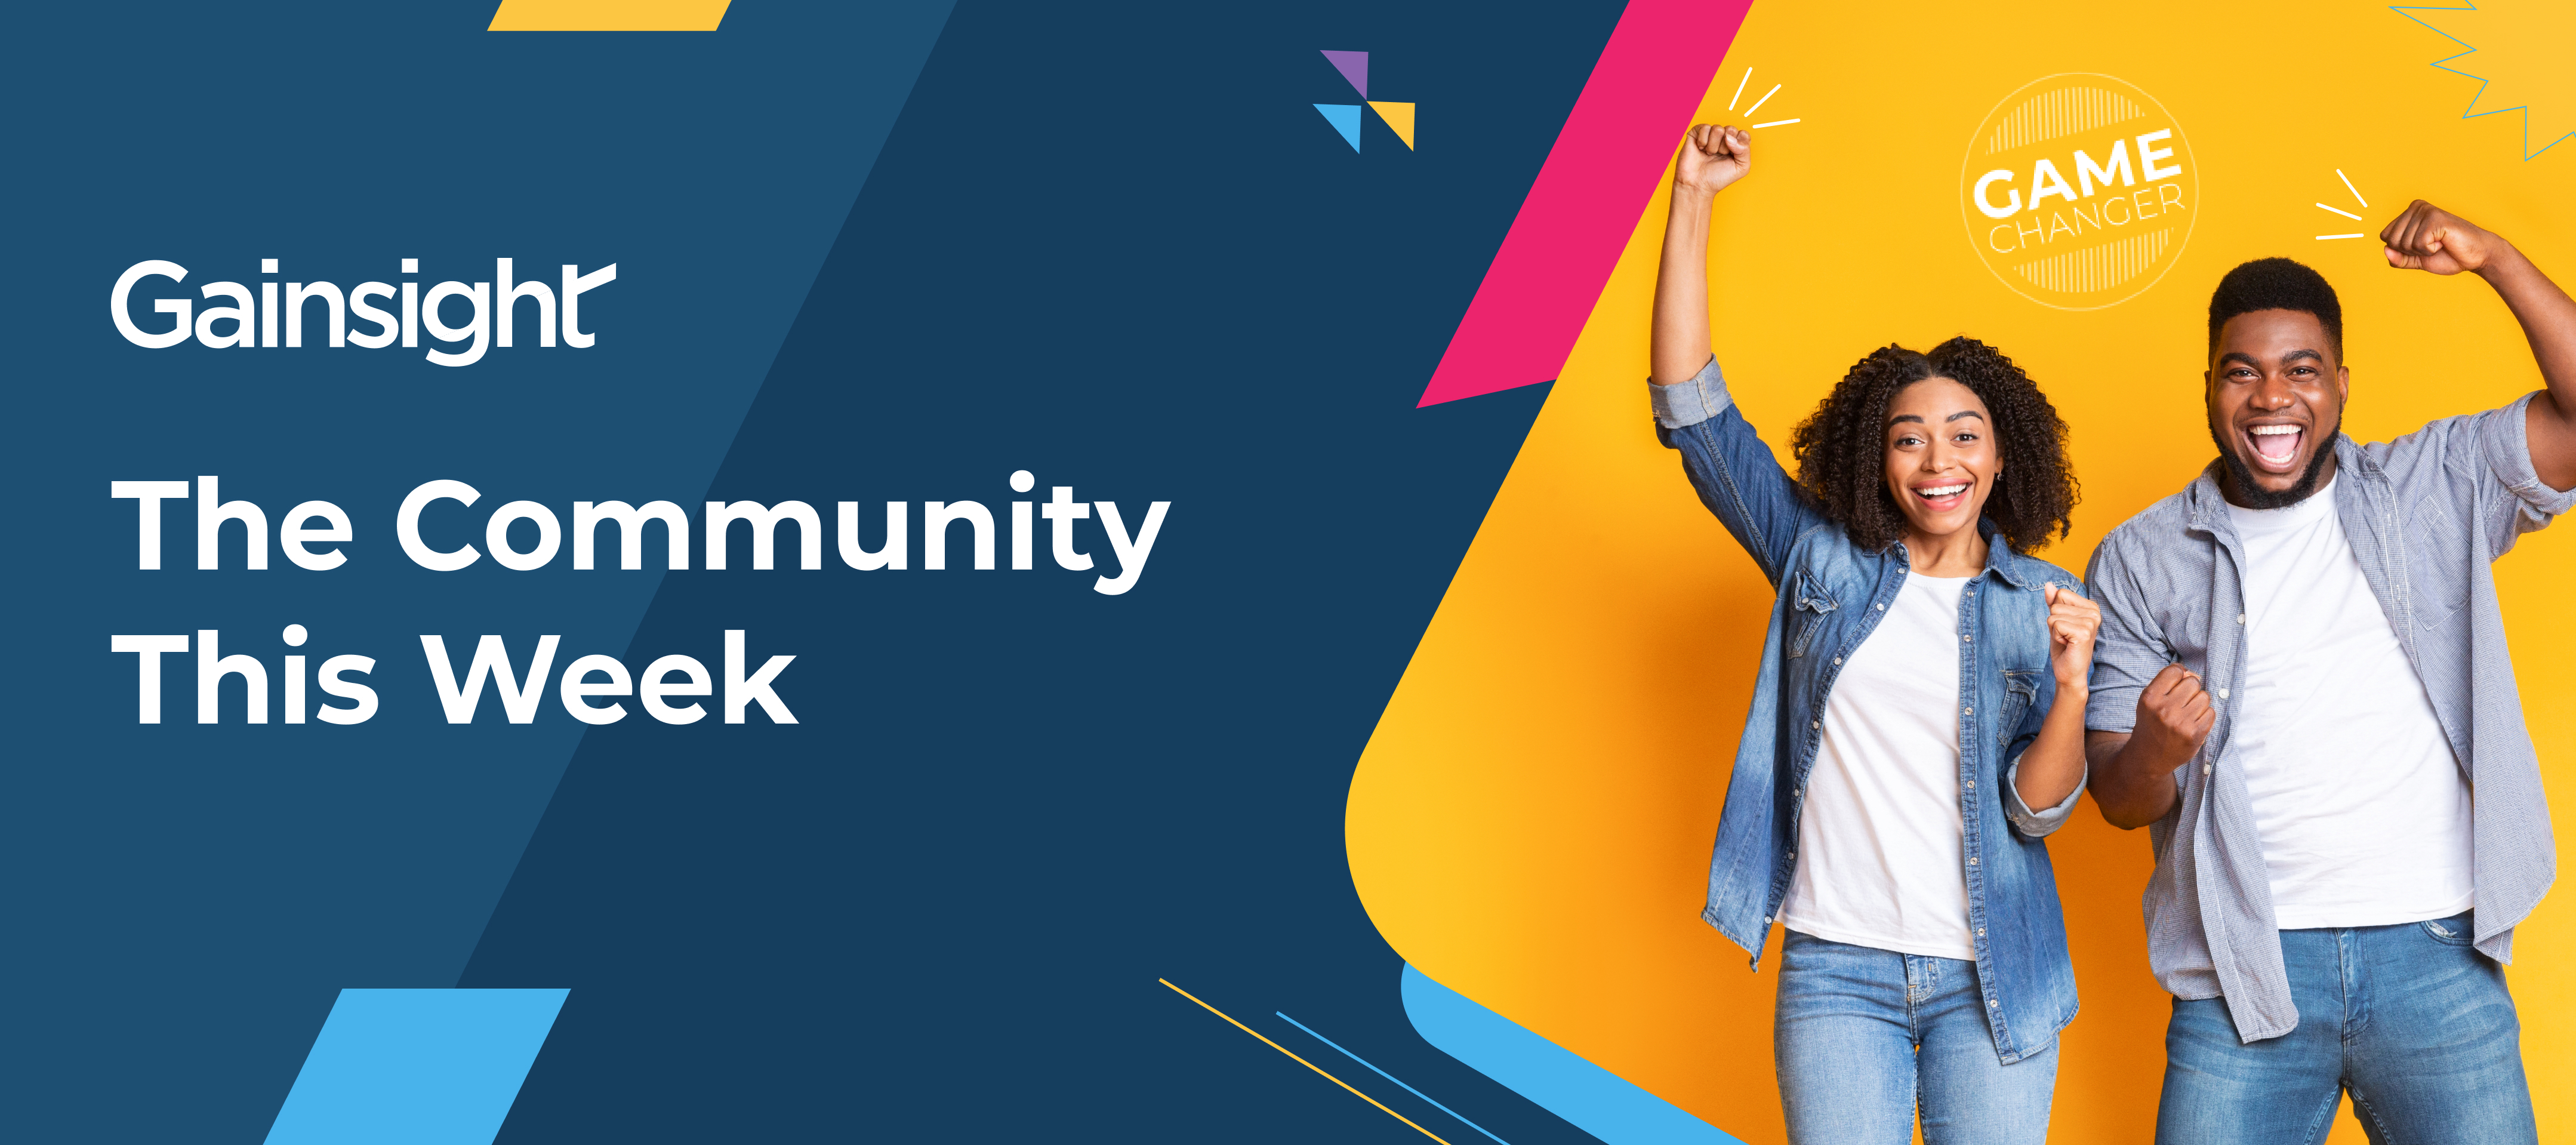 The Community This Week: Do you have a quick Gainsight tip to share?